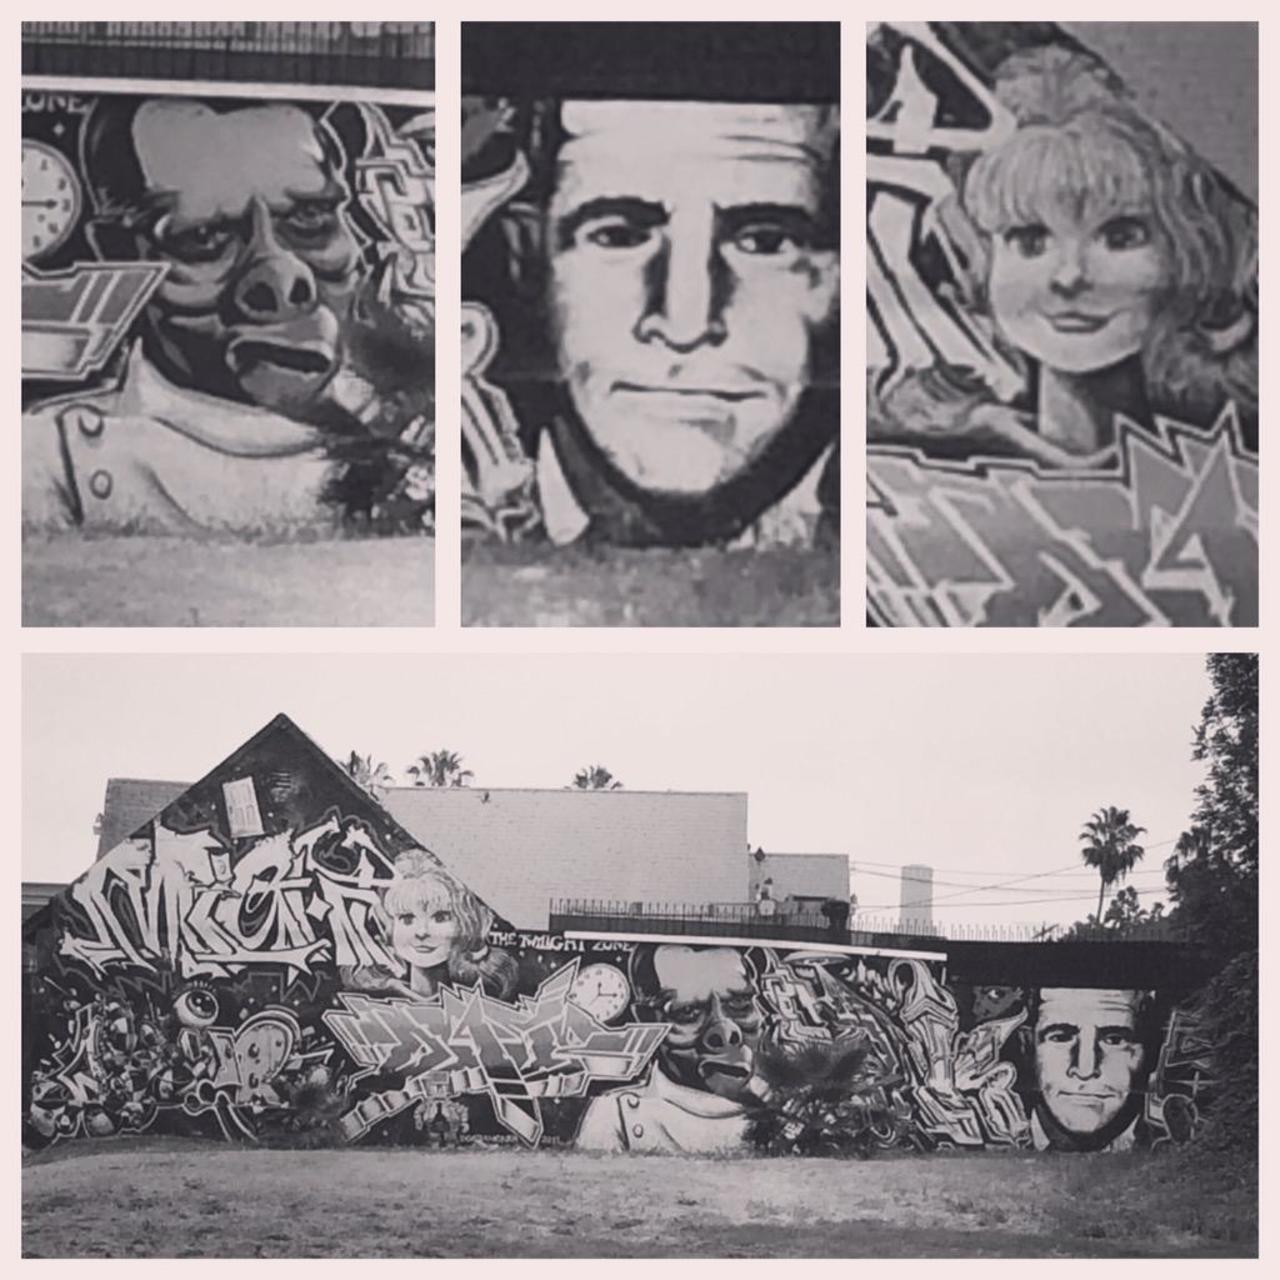 #twilightzone #graffiti #streetart #mural must be #blackandwhite for the purity of this #classictvshow #classic http://t.co/uqAJawbT4o